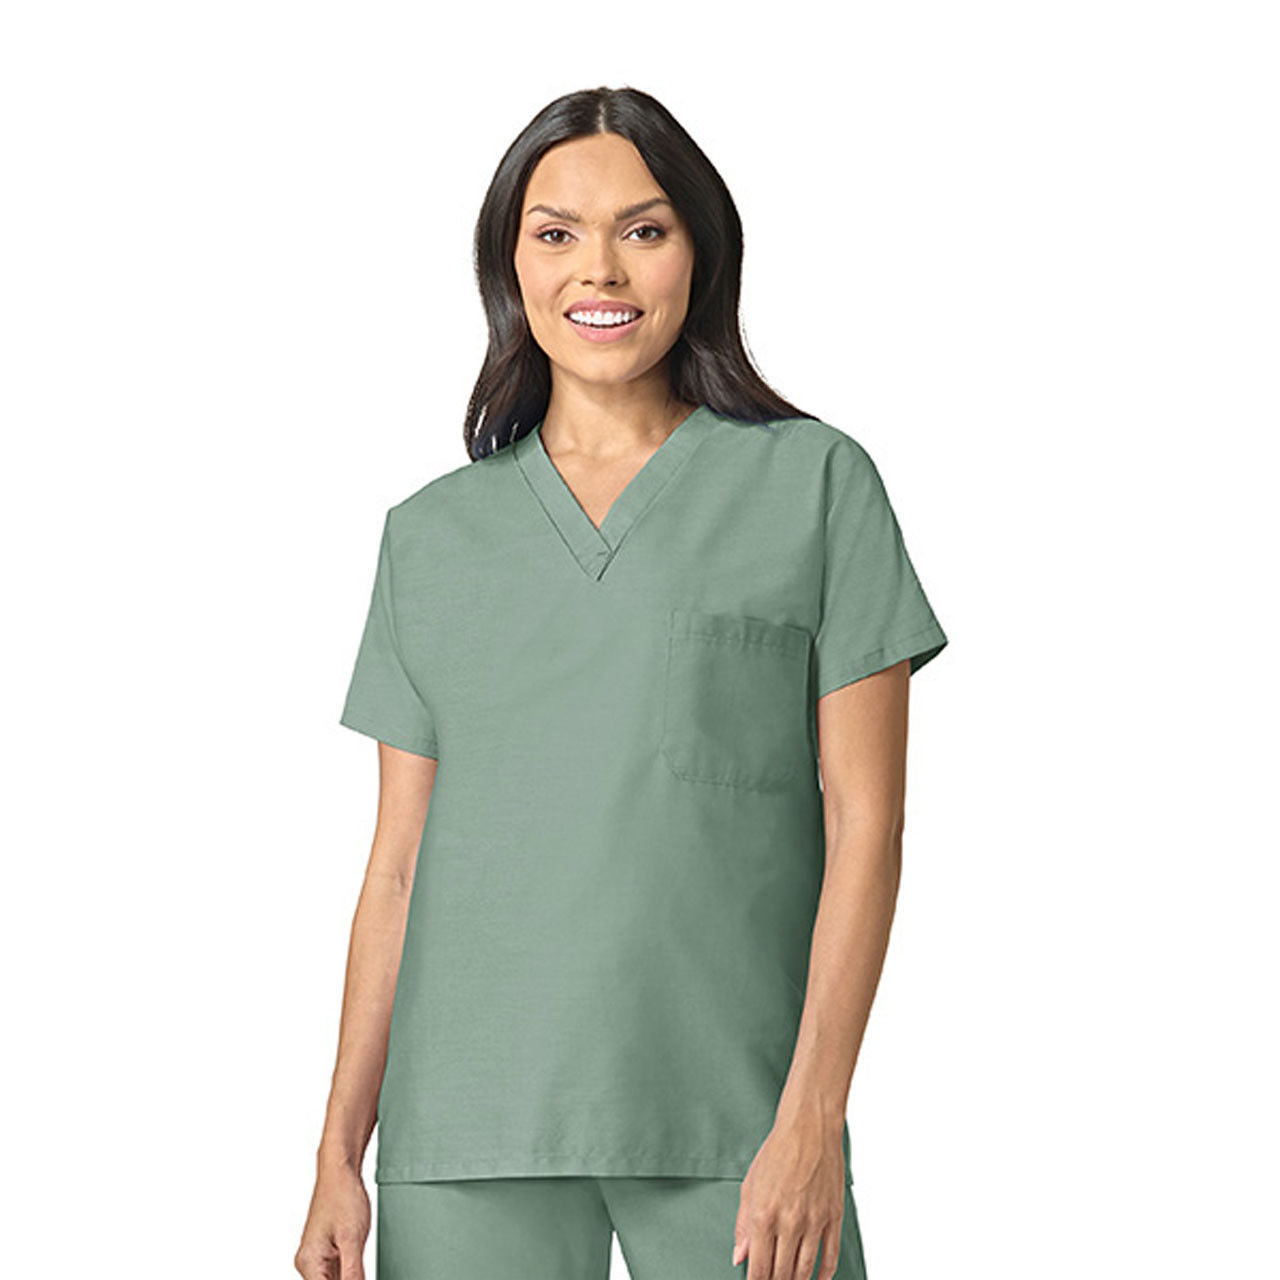 Are there any benefits to buying sage green scrubs over regular green?